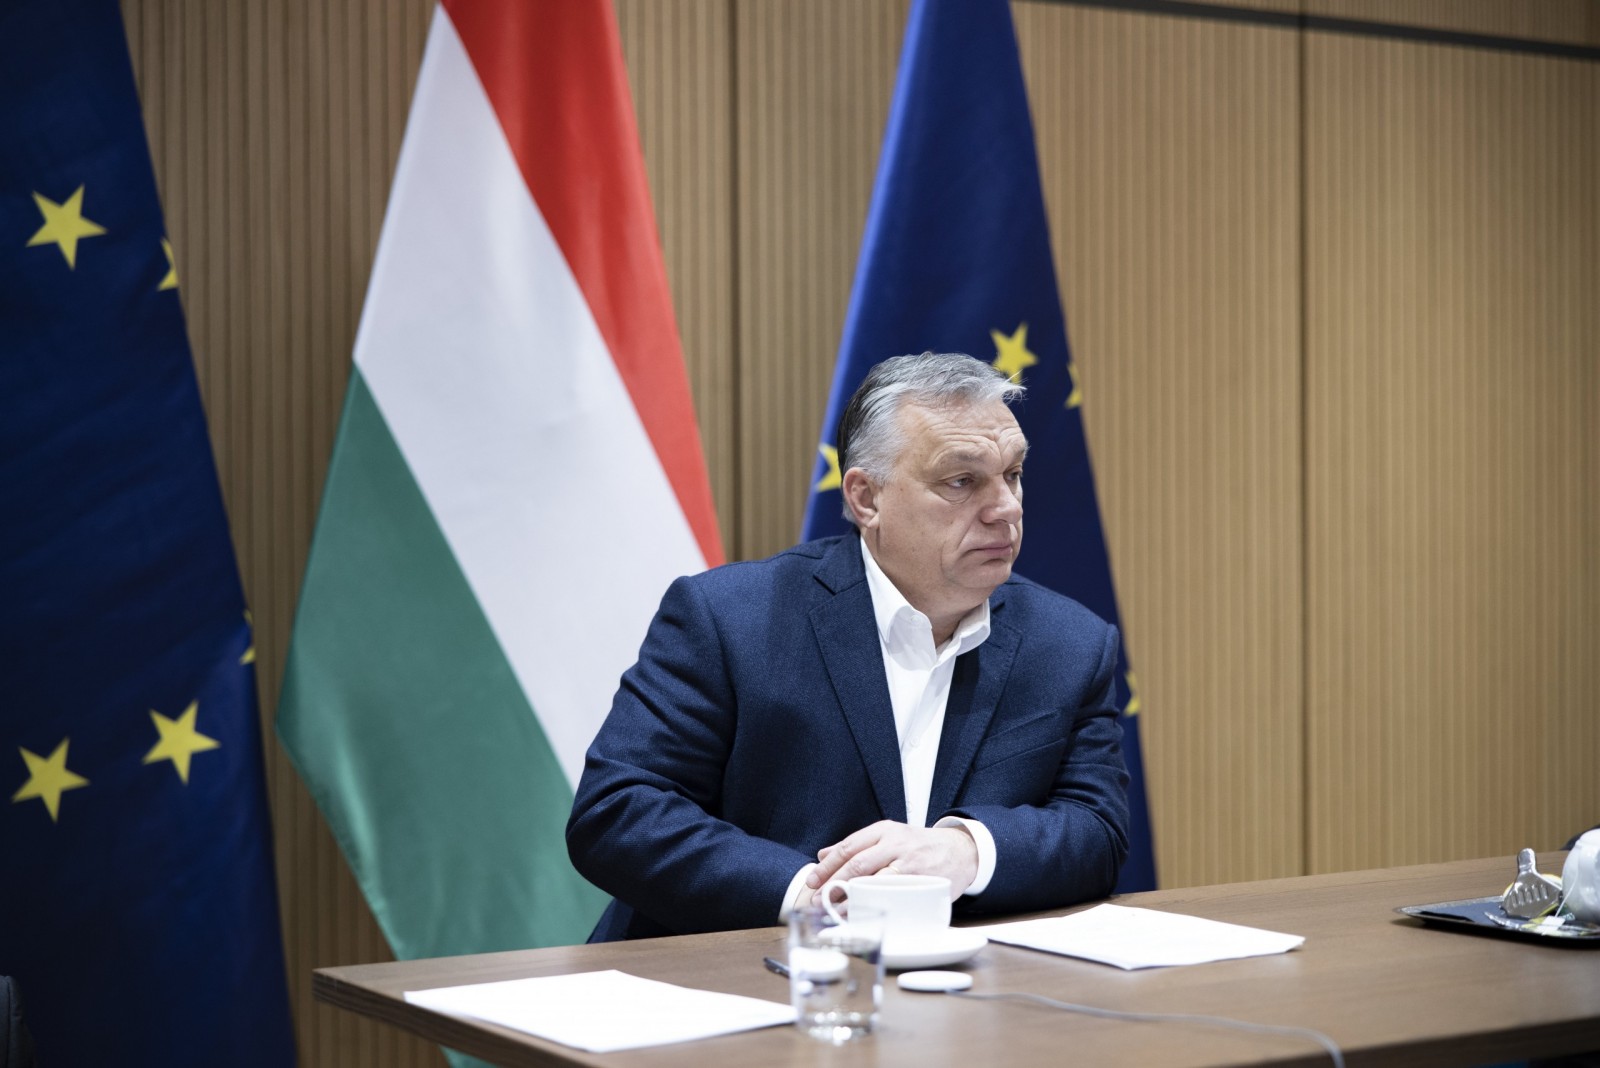 epa10452259 A handout photo made available by the Hungarian Prime Minister's Press Office, of Hungarian Prime Minister Viktor Orban attending a video conference along with his Polish, Belgian, Finnish and Maltese counterparts, as well as the Bulgarian President and European Council President in preparation for the upcoming European Union summit, in Sopron, Hungary, 07 February 2023. The extraordinary meeting of the European Council will take place in Bussels from 09 to 10 February with a focus on the war in Ukraine, economic challenges and illegal migration.  EPA/Prime Minister's Press Office HANDOUT  HANDOUT EDITORIAL USE ONLY/NO SALES